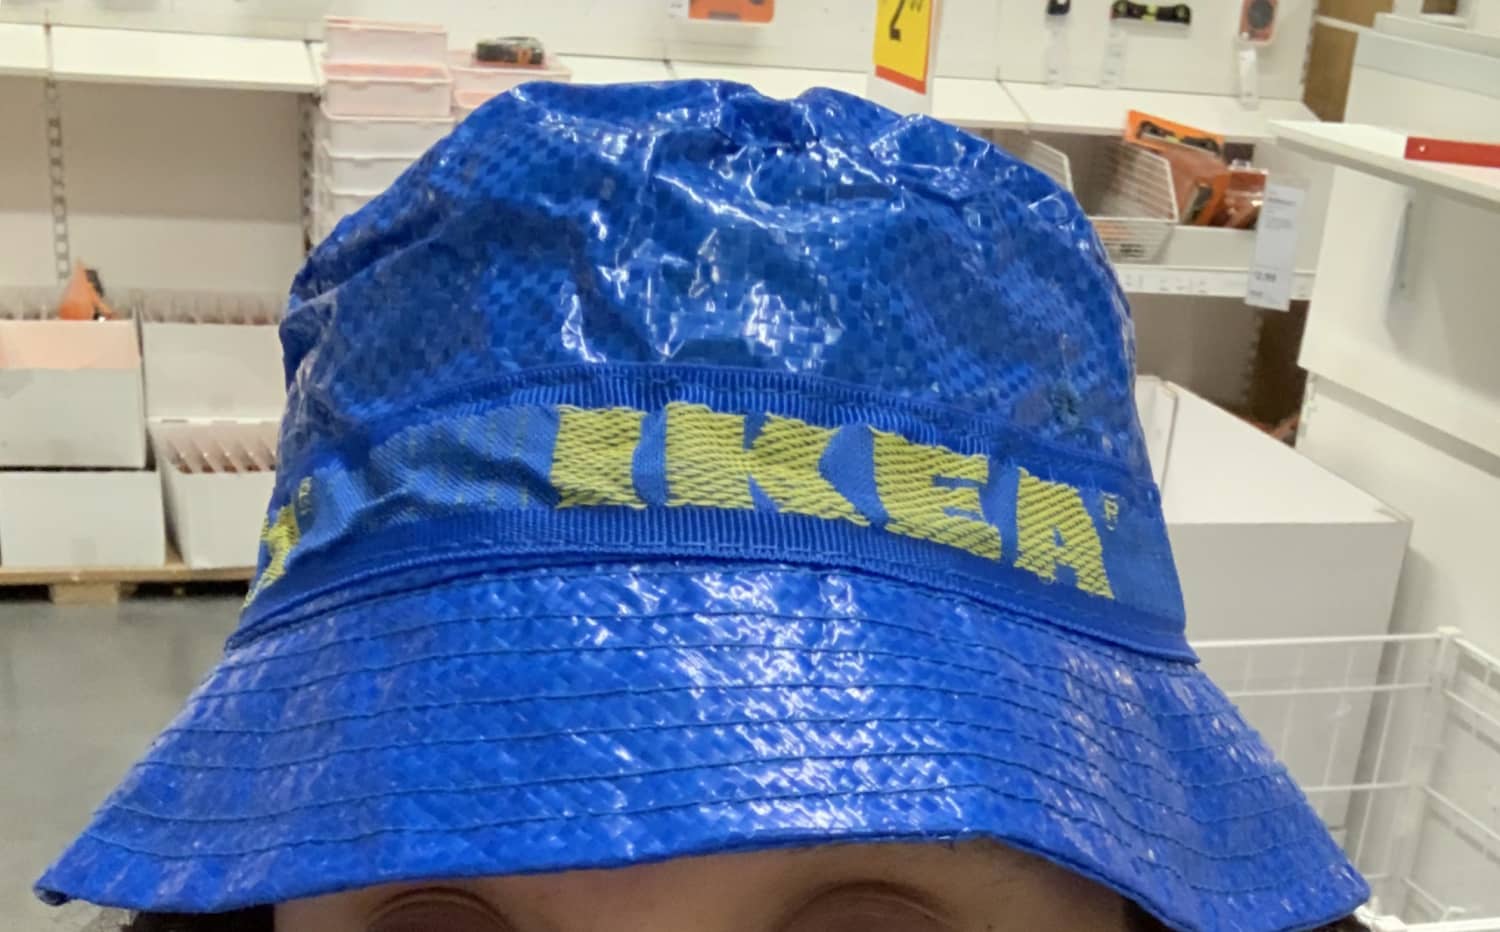 IKEA Is Selling Hats Made From Their Iconic Shopping Bags | Apartment Therapy